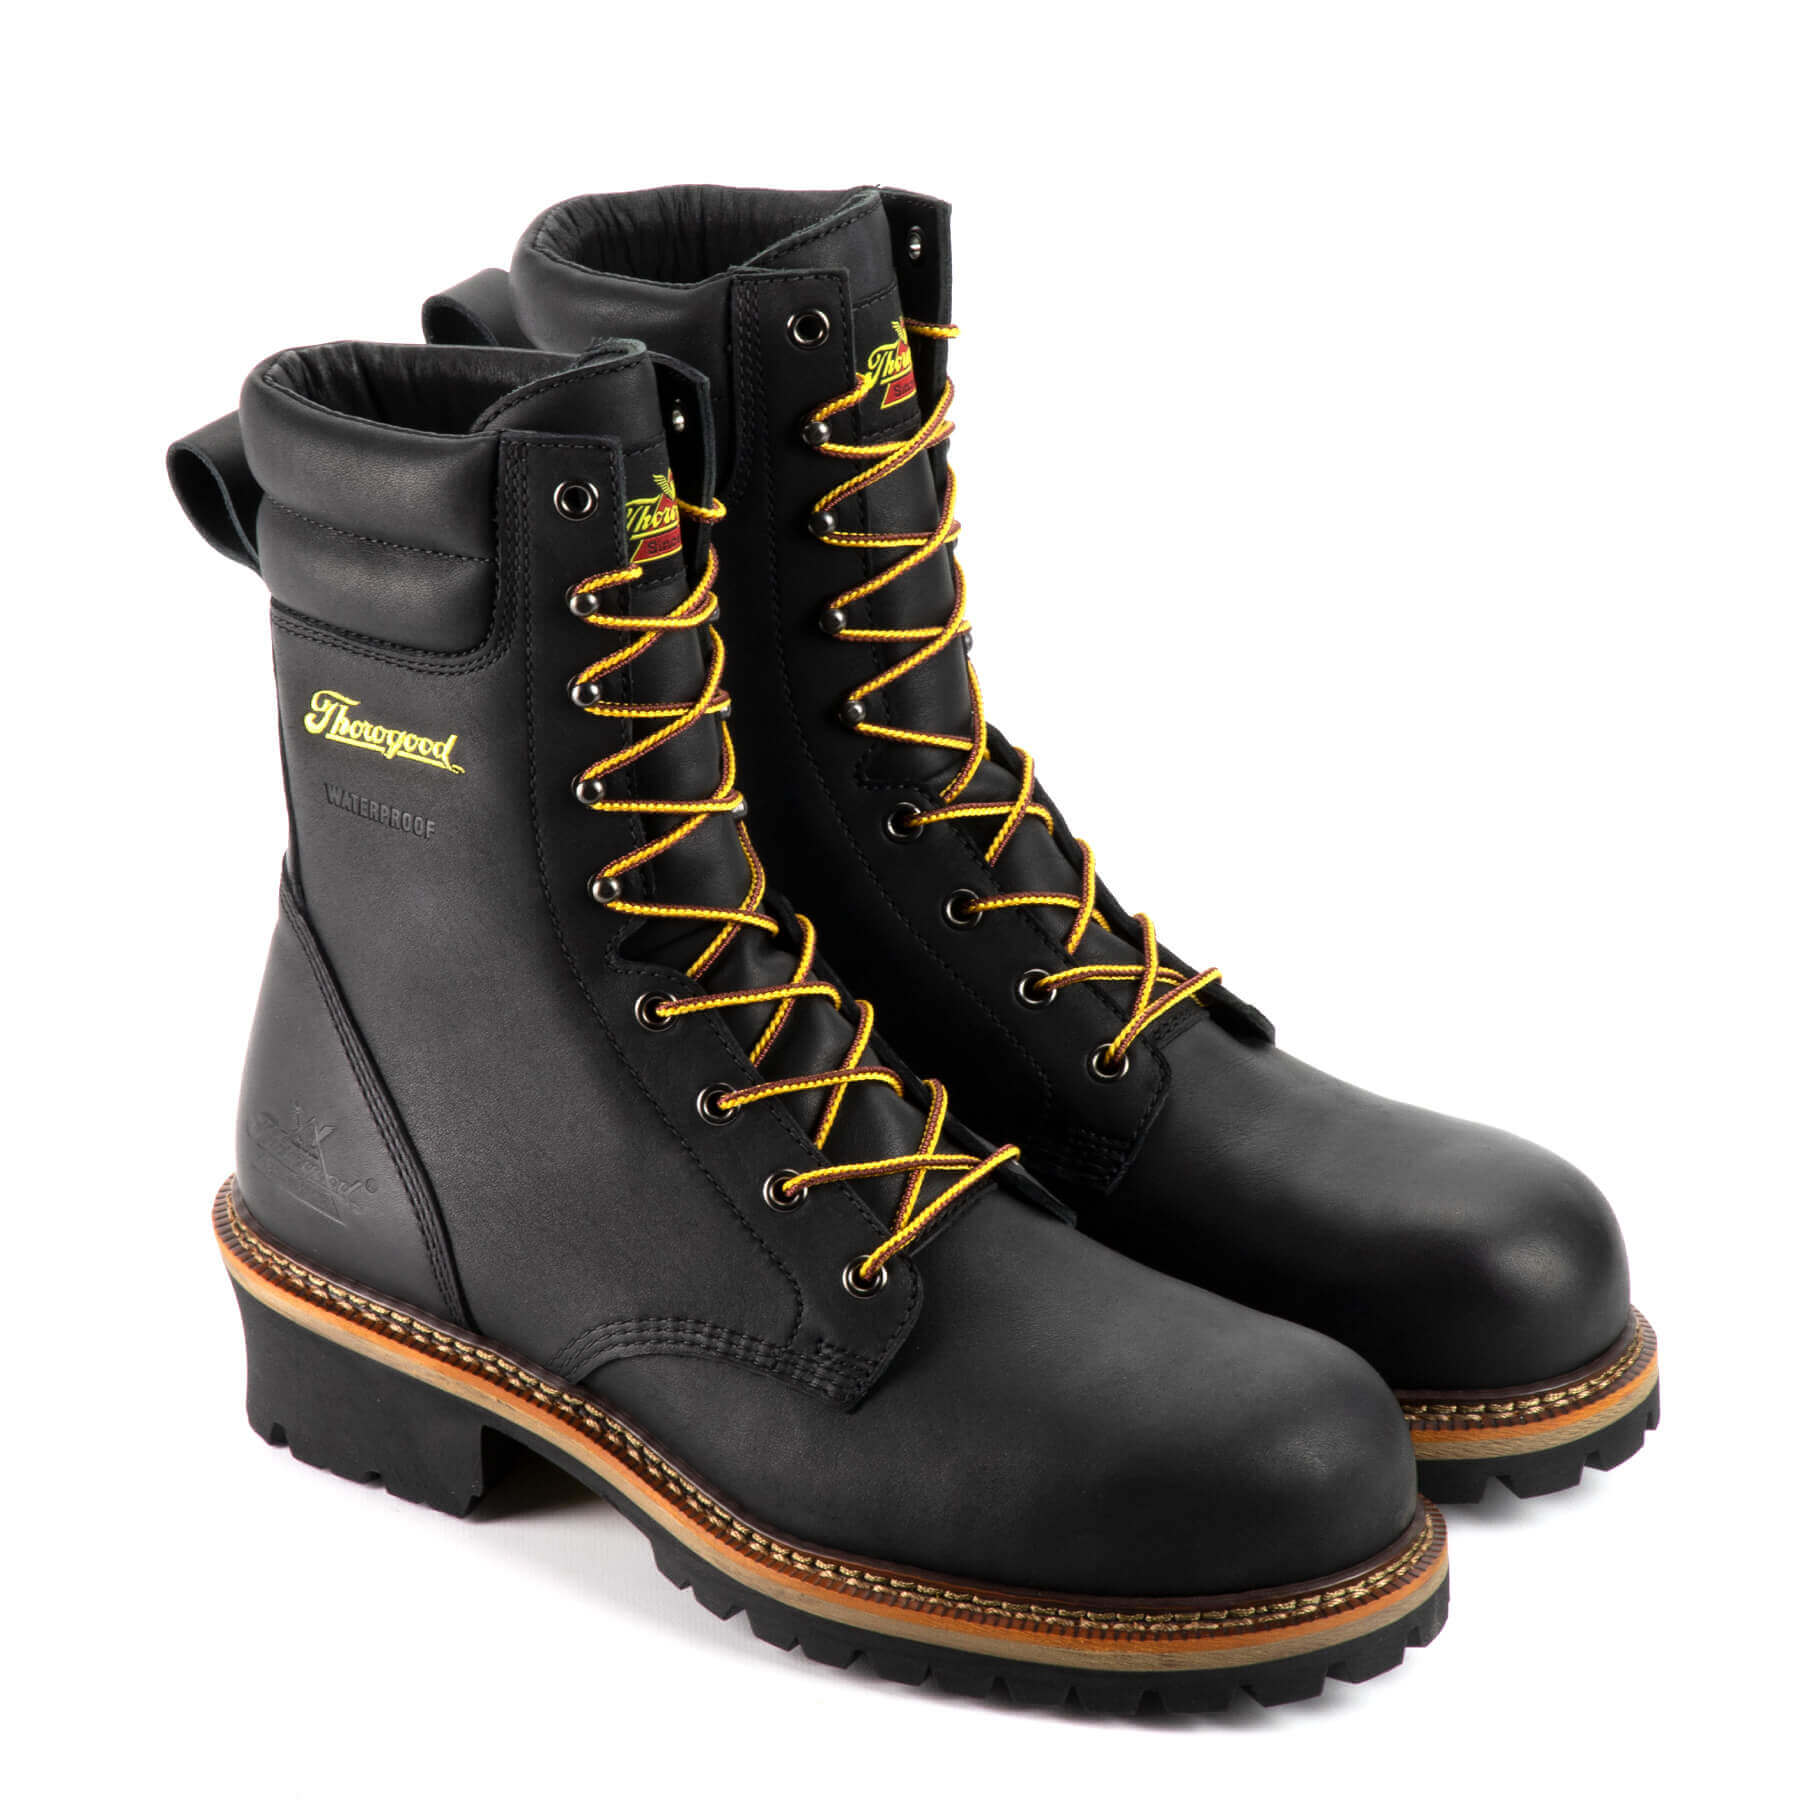 1 inch logger boots